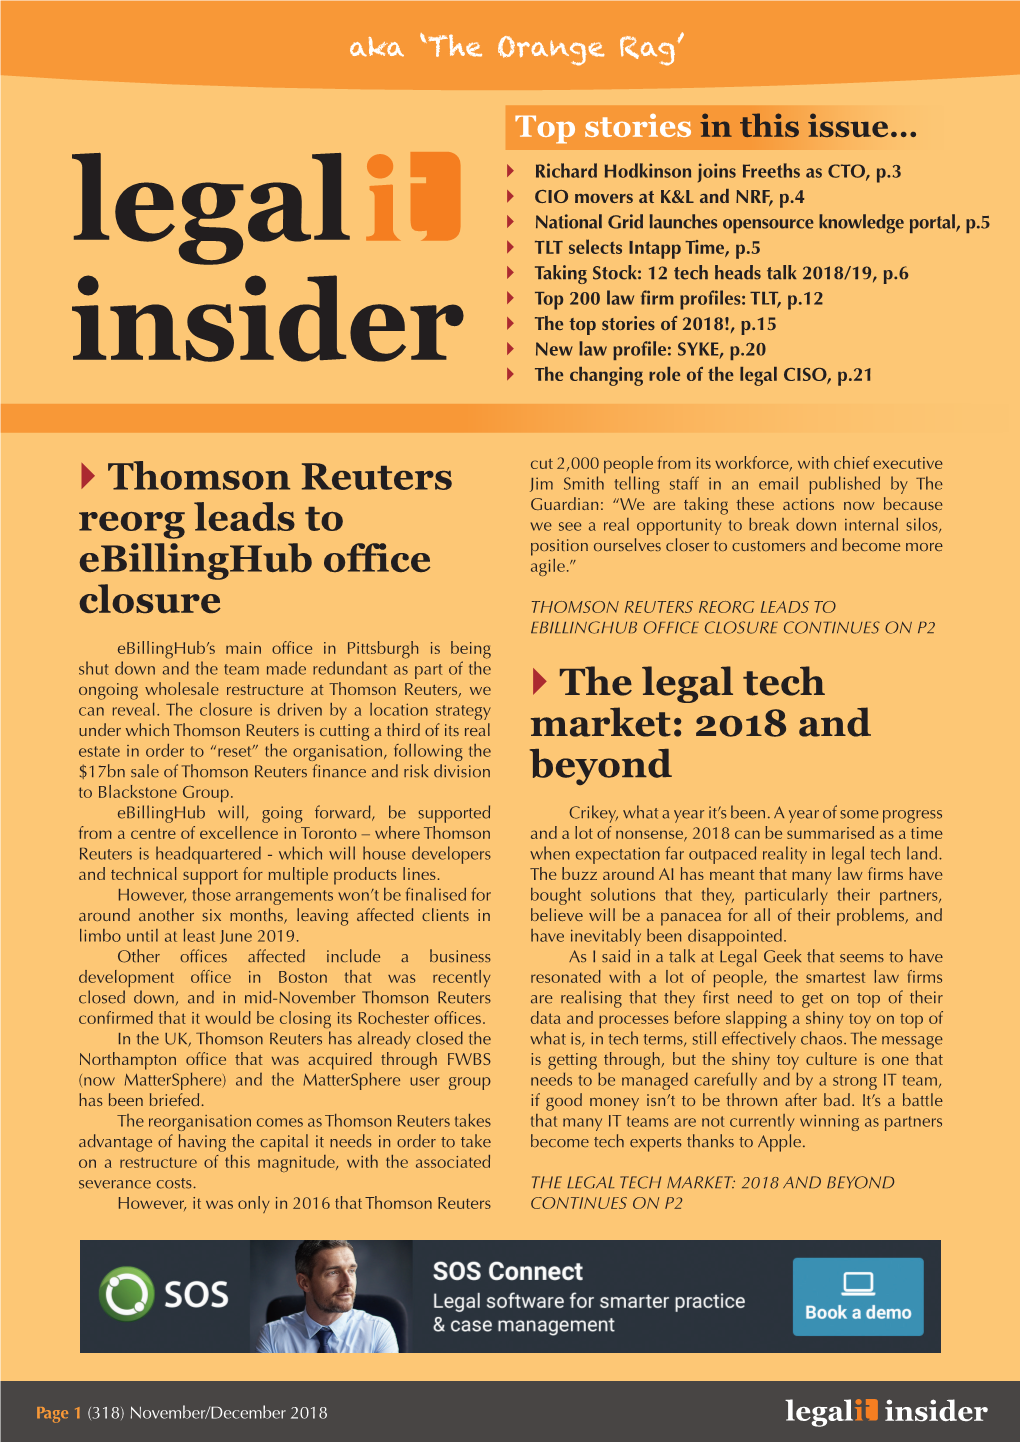 Thomson Reuters Reorg Leads to Ebillinghub Office Closure the Legal